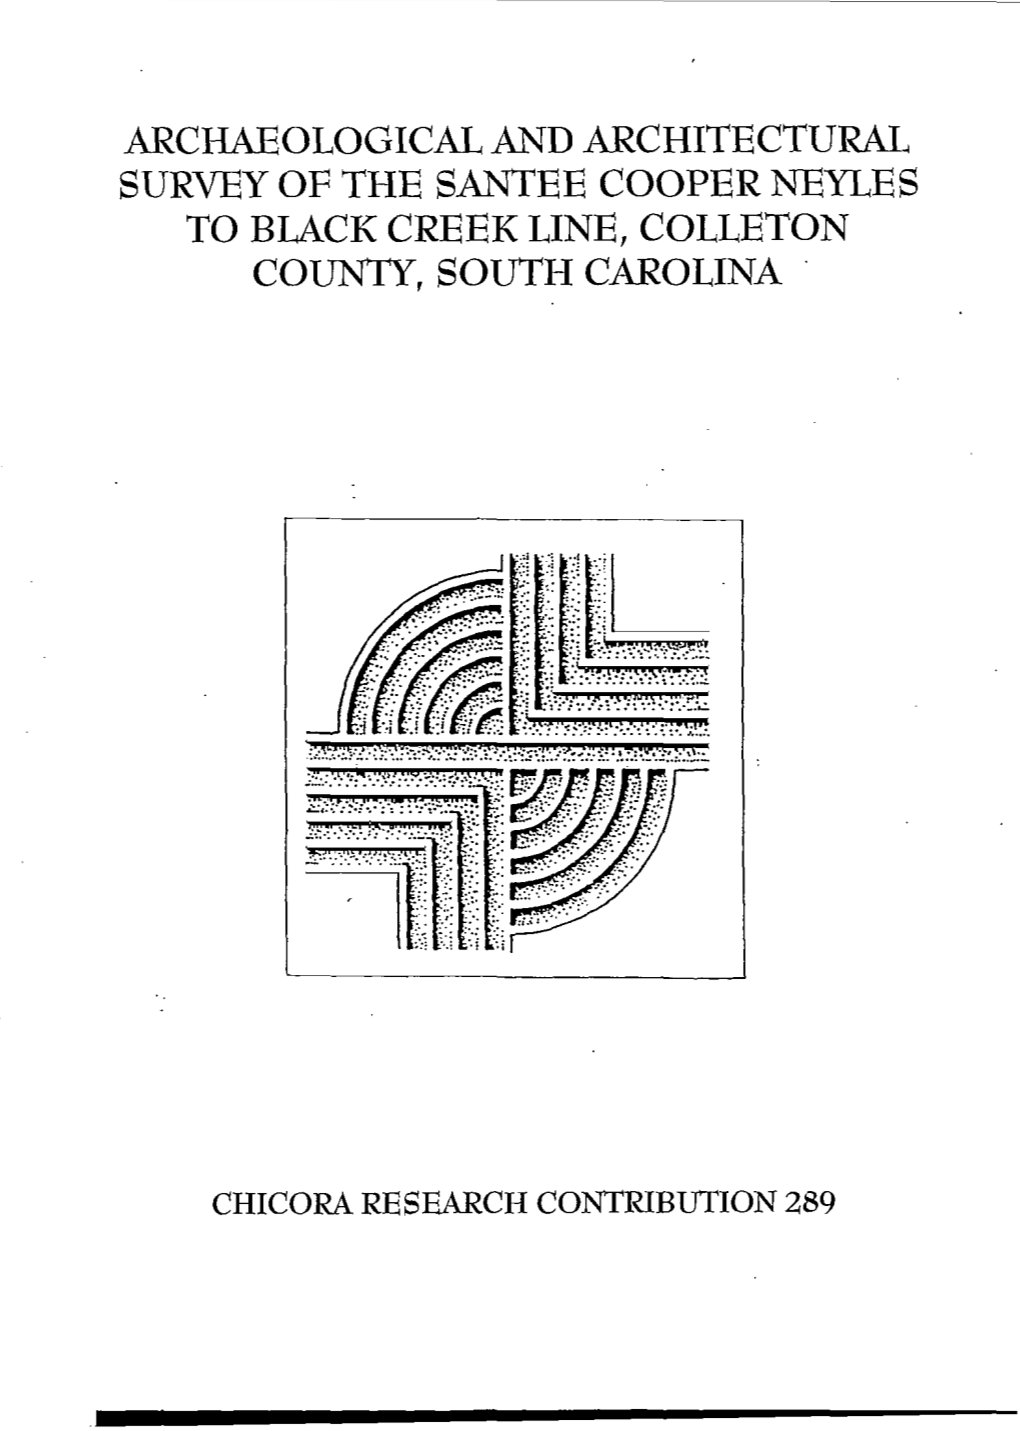 Archaeological and Architectural Survey of the Santee Cooper Neyles to Black Creek Line, Colleton County, South Carolina